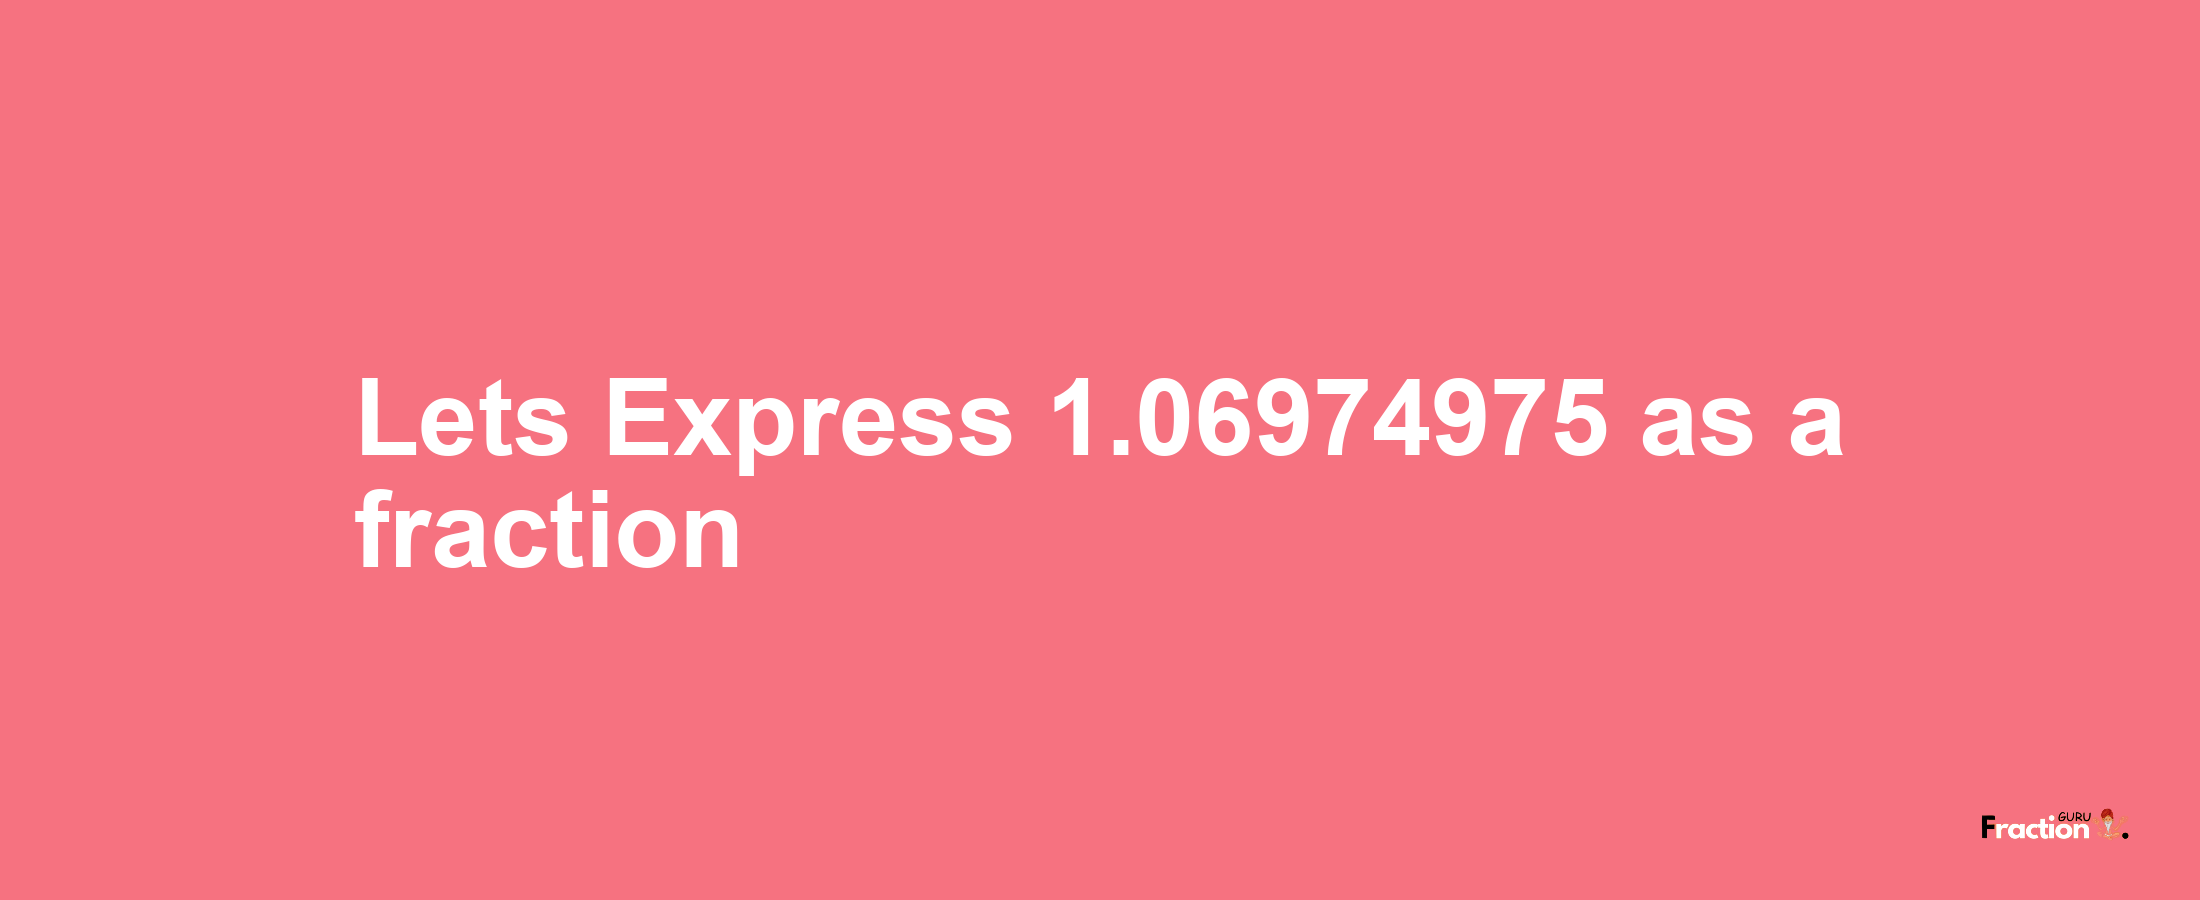 Lets Express 1.06974975 as afraction